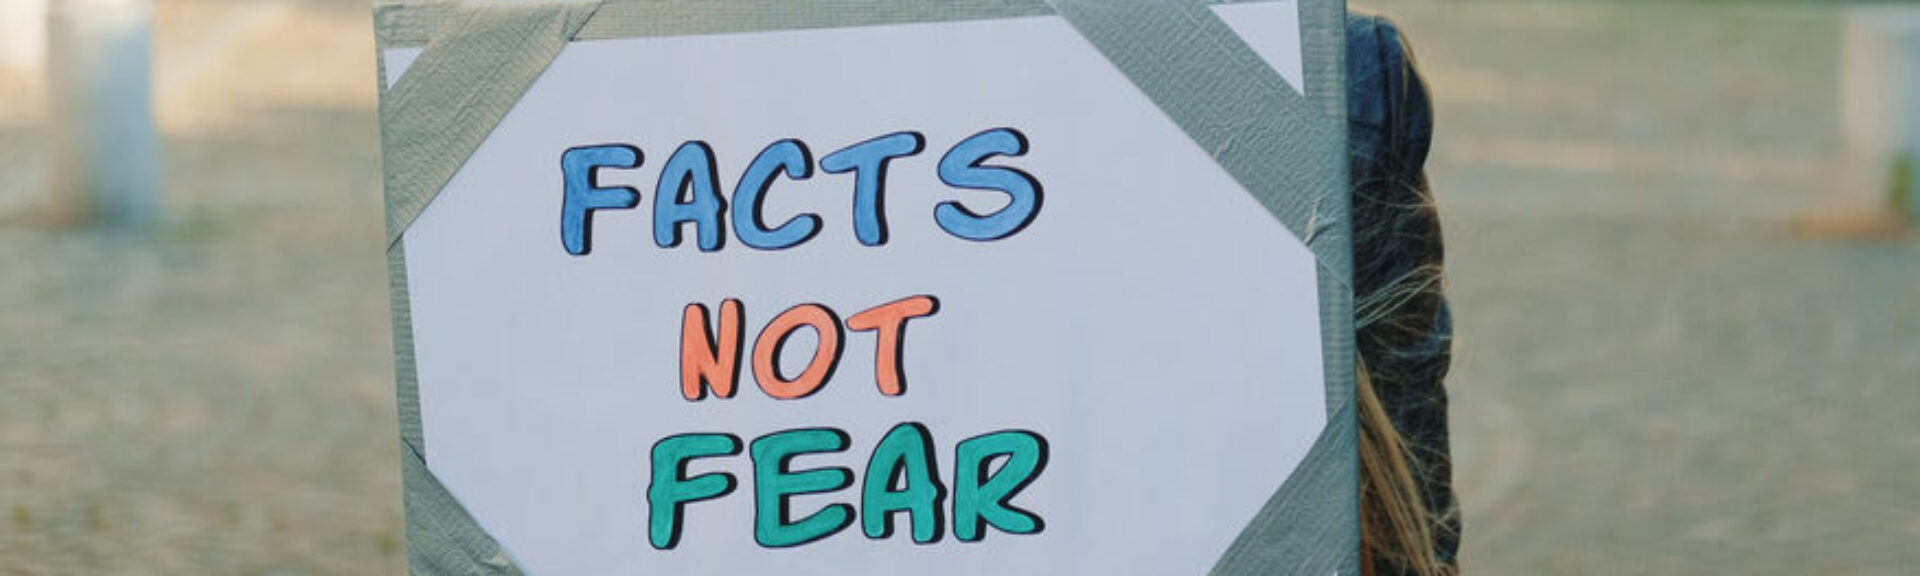 Facts not fear